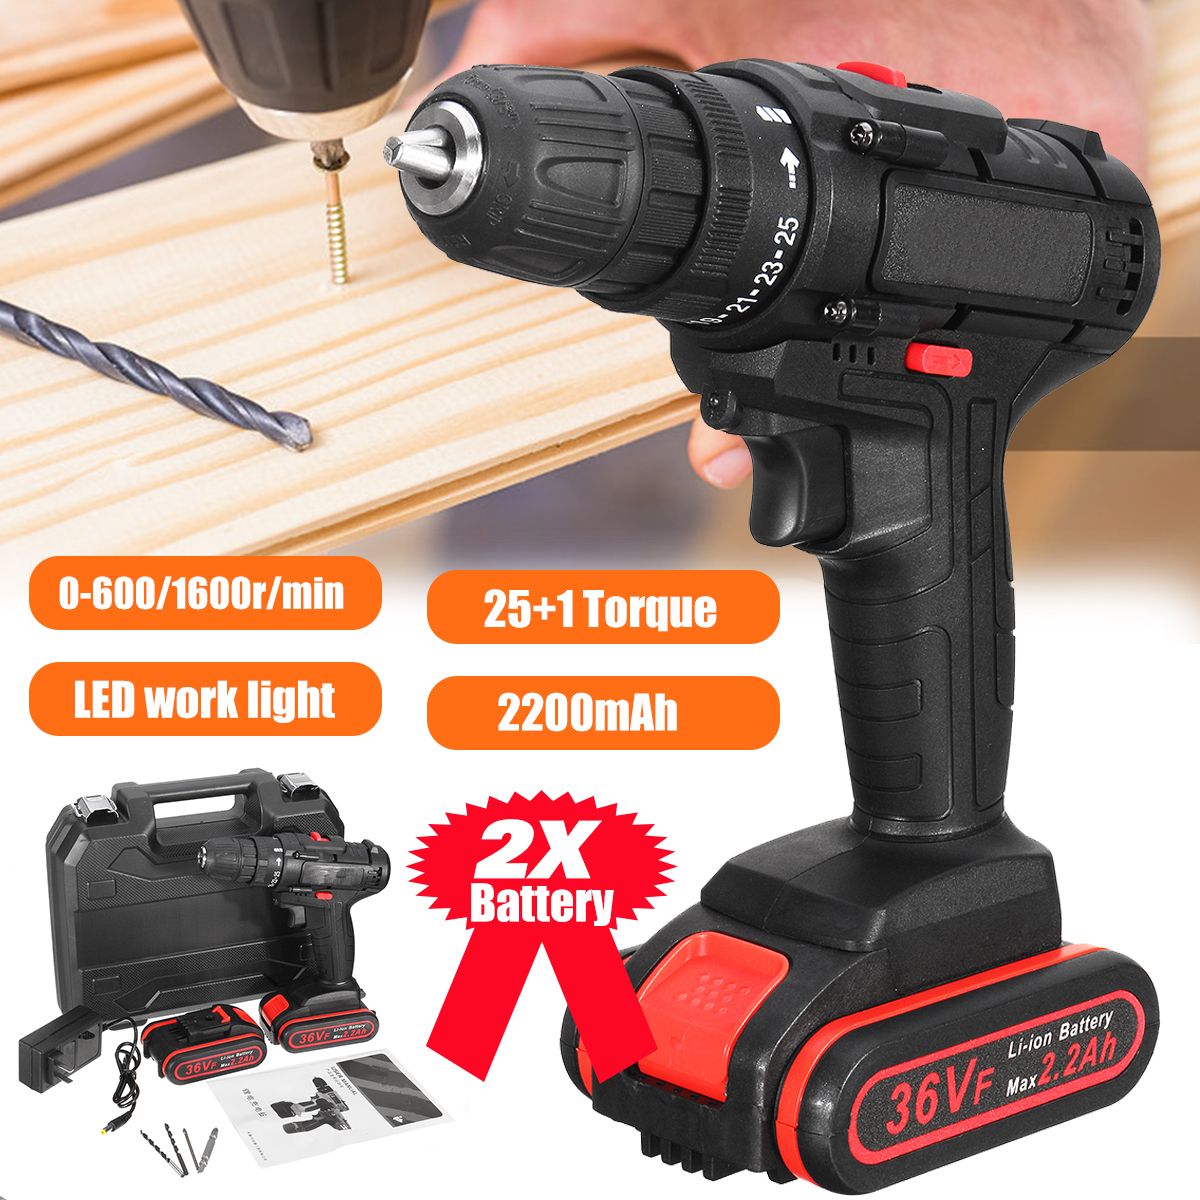 36V-Cordless-Electric-Drill-Speed-Adjustable-with-Two--Lithium-Rechargeable-Battery-2-Speed-Adjustme-1598204